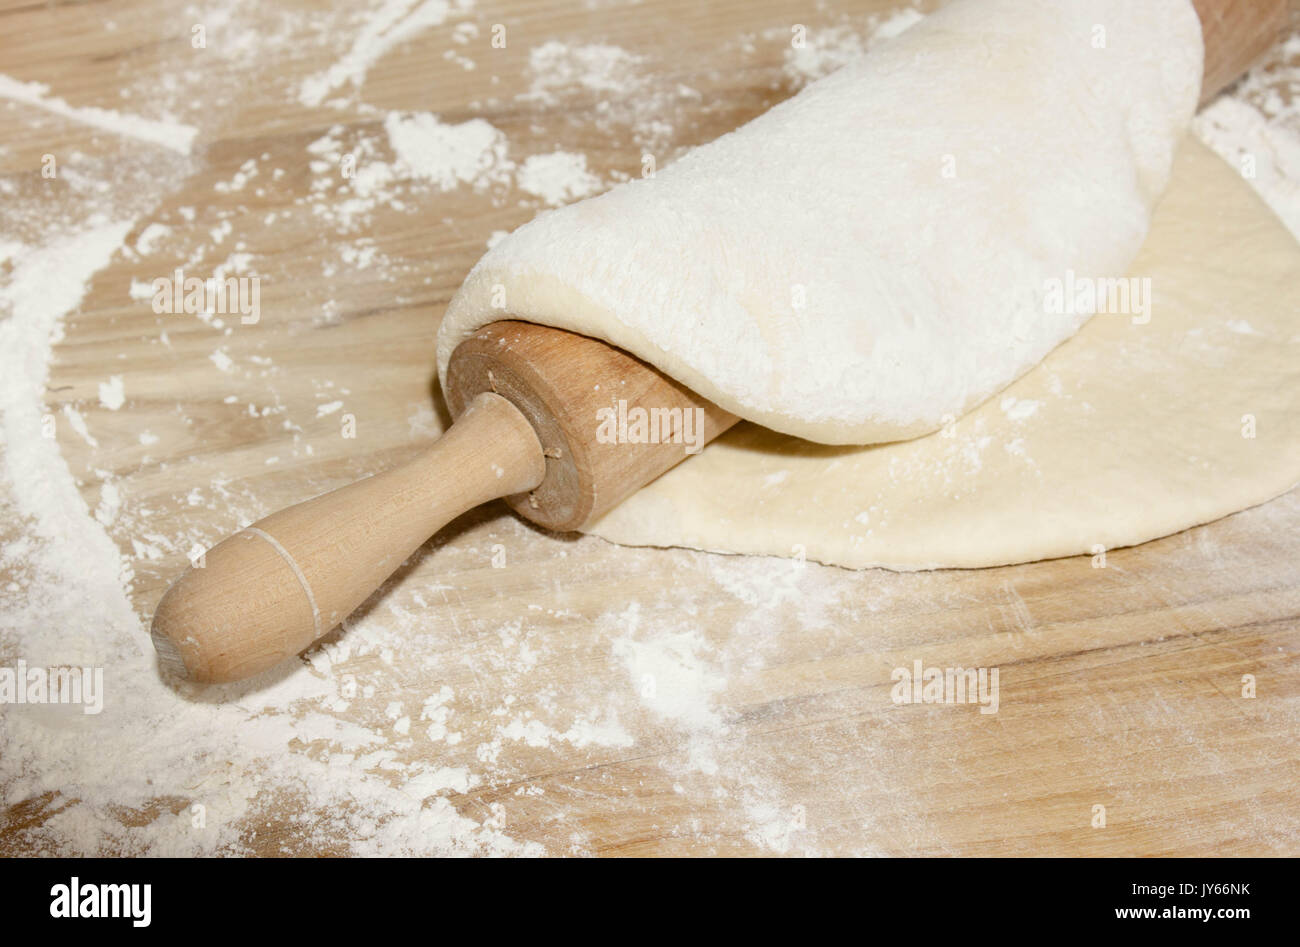 kitchen table with wheat flour, dough and roll for pizza or bread making Stock Photo